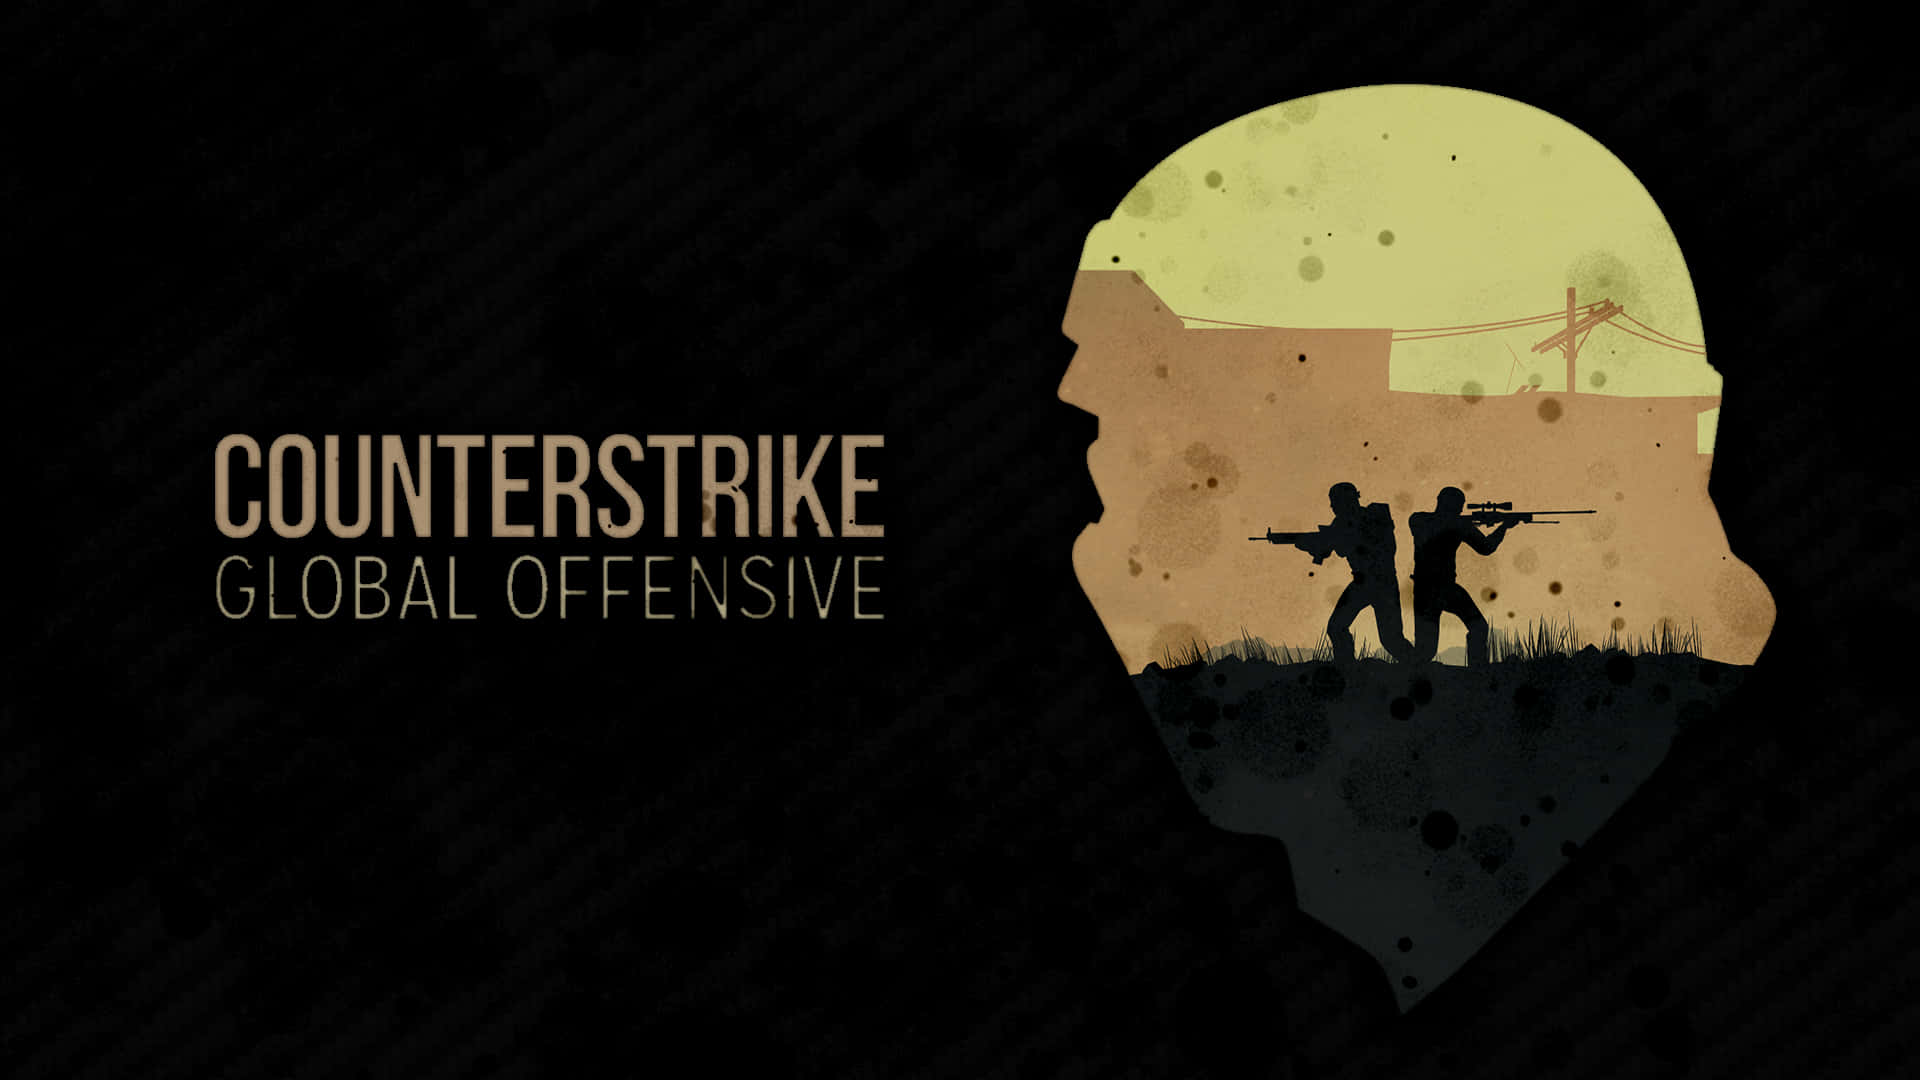 Phenomenal 1080p Counter Strike Global Offensive Background Vector Art